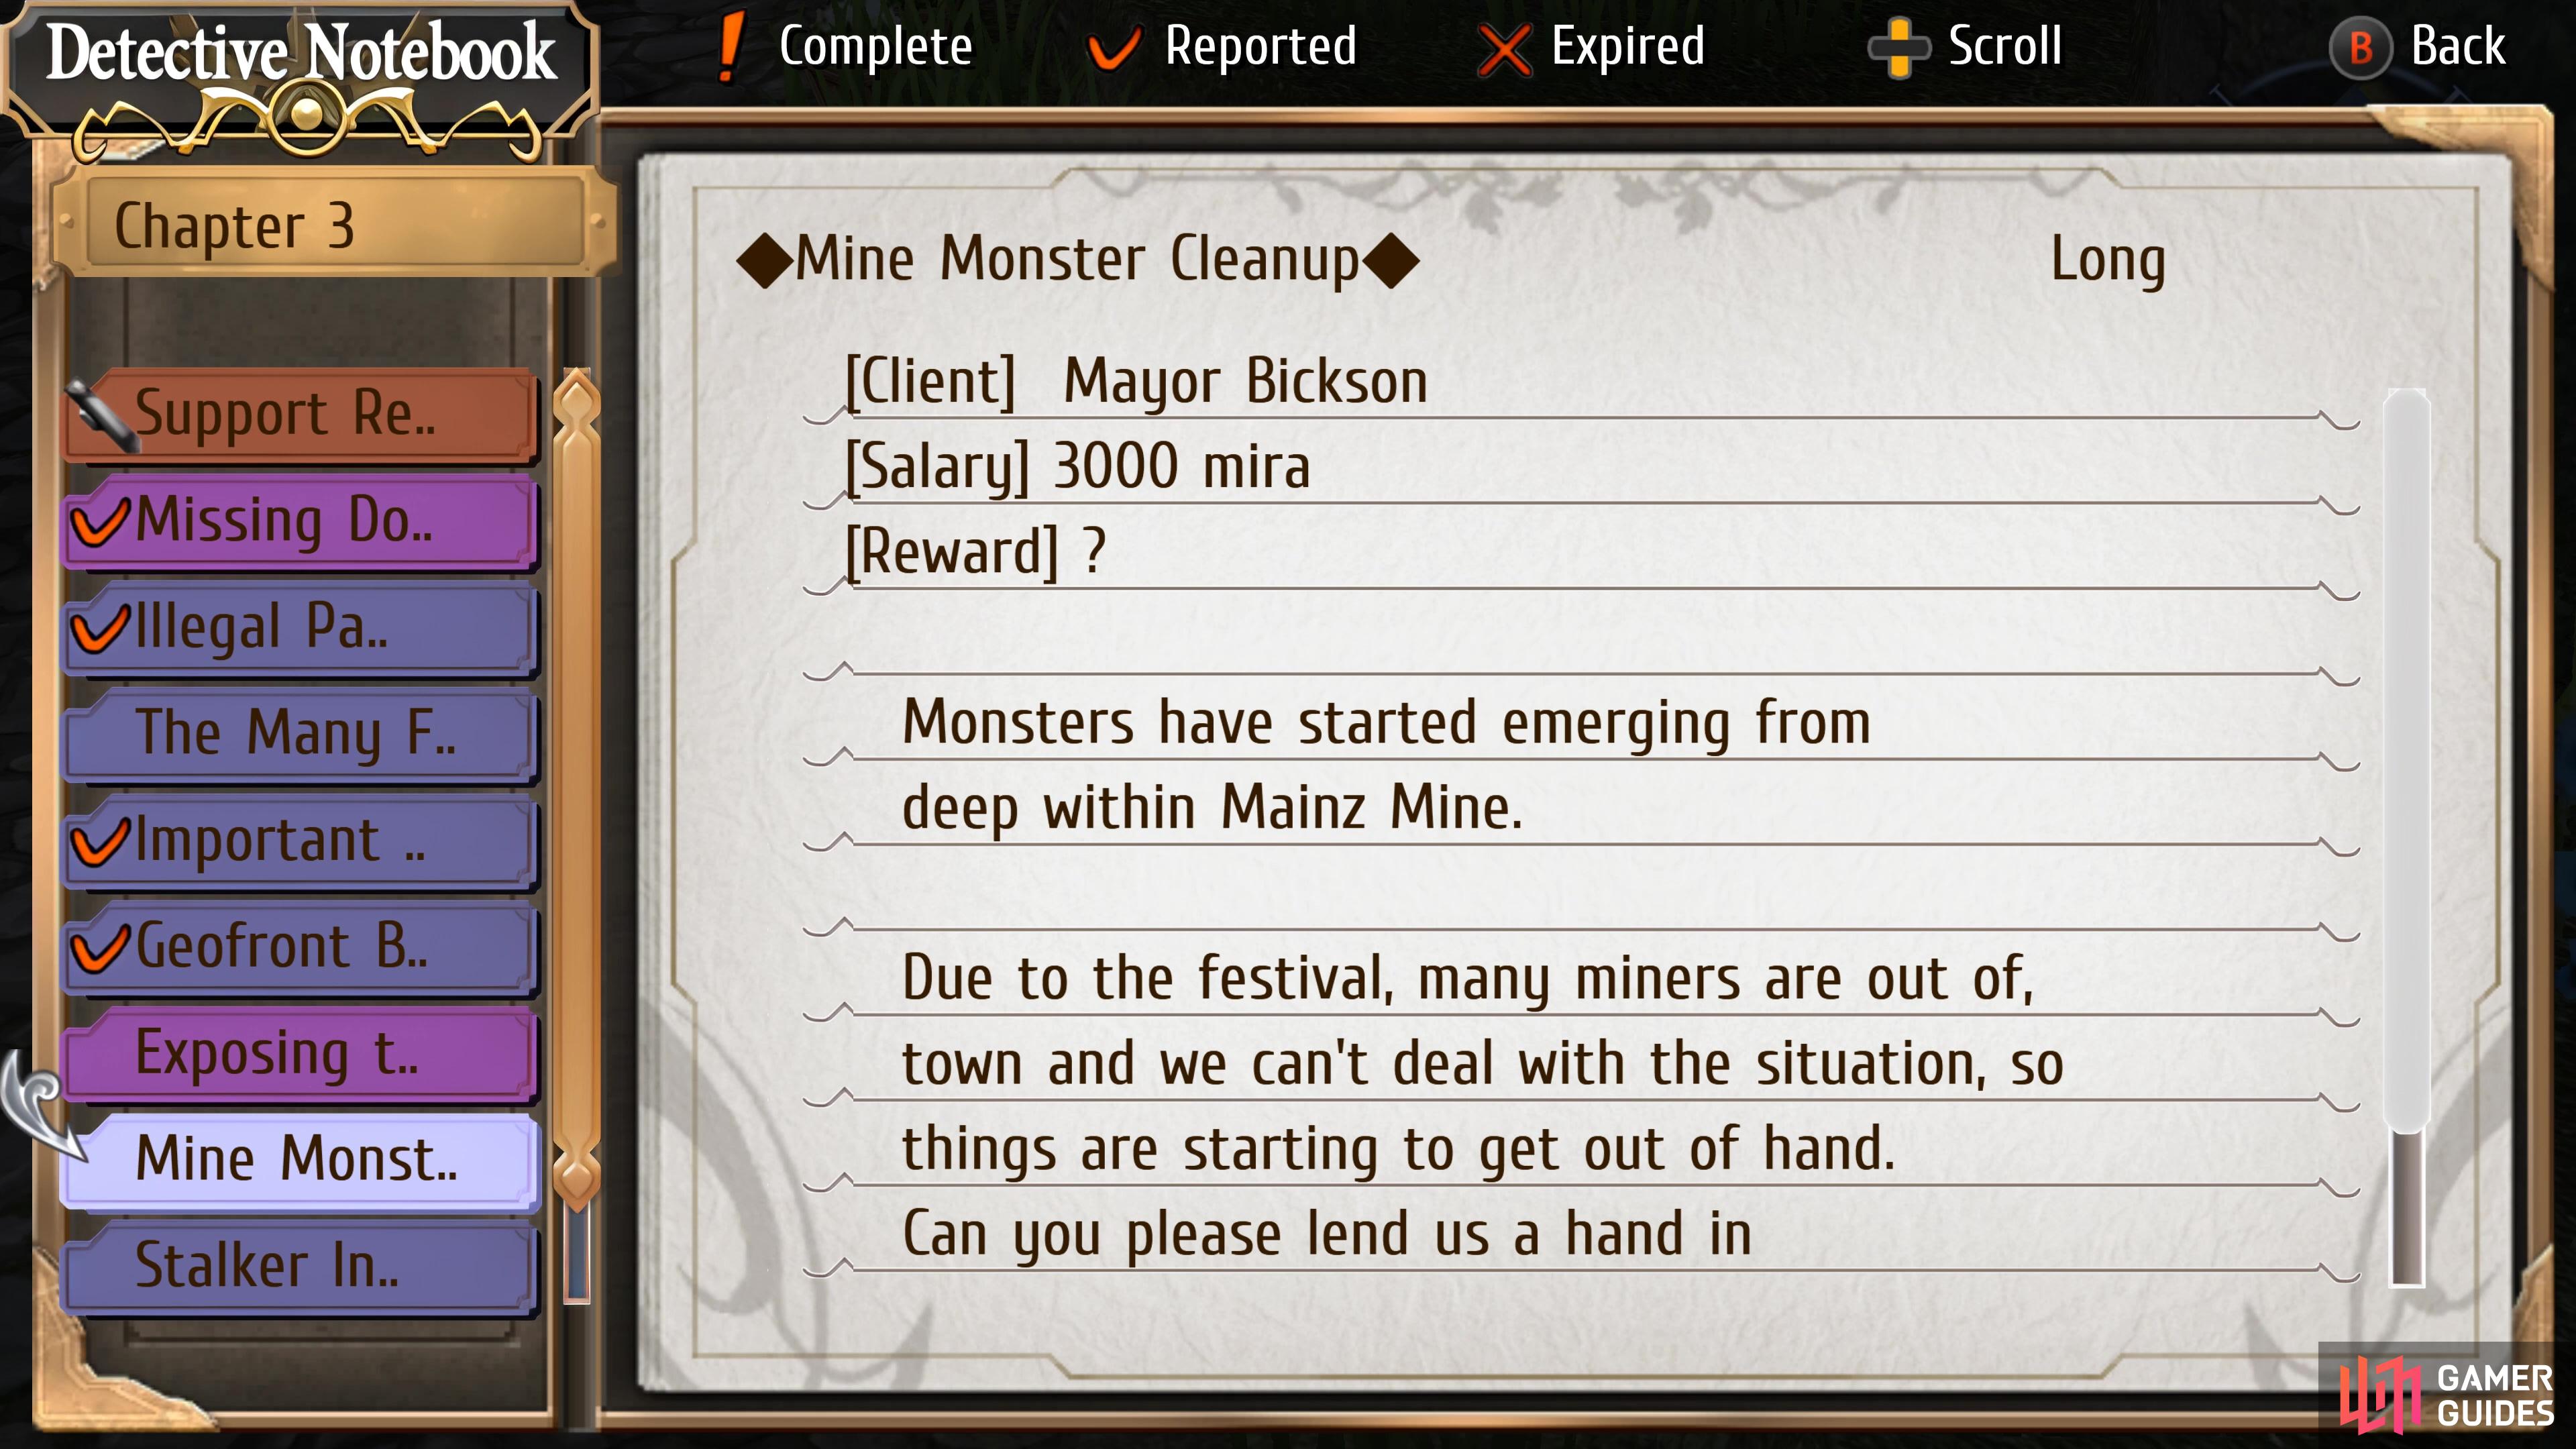 Mine Monster Cleanup is a Request on Chapter 3 Day 2.